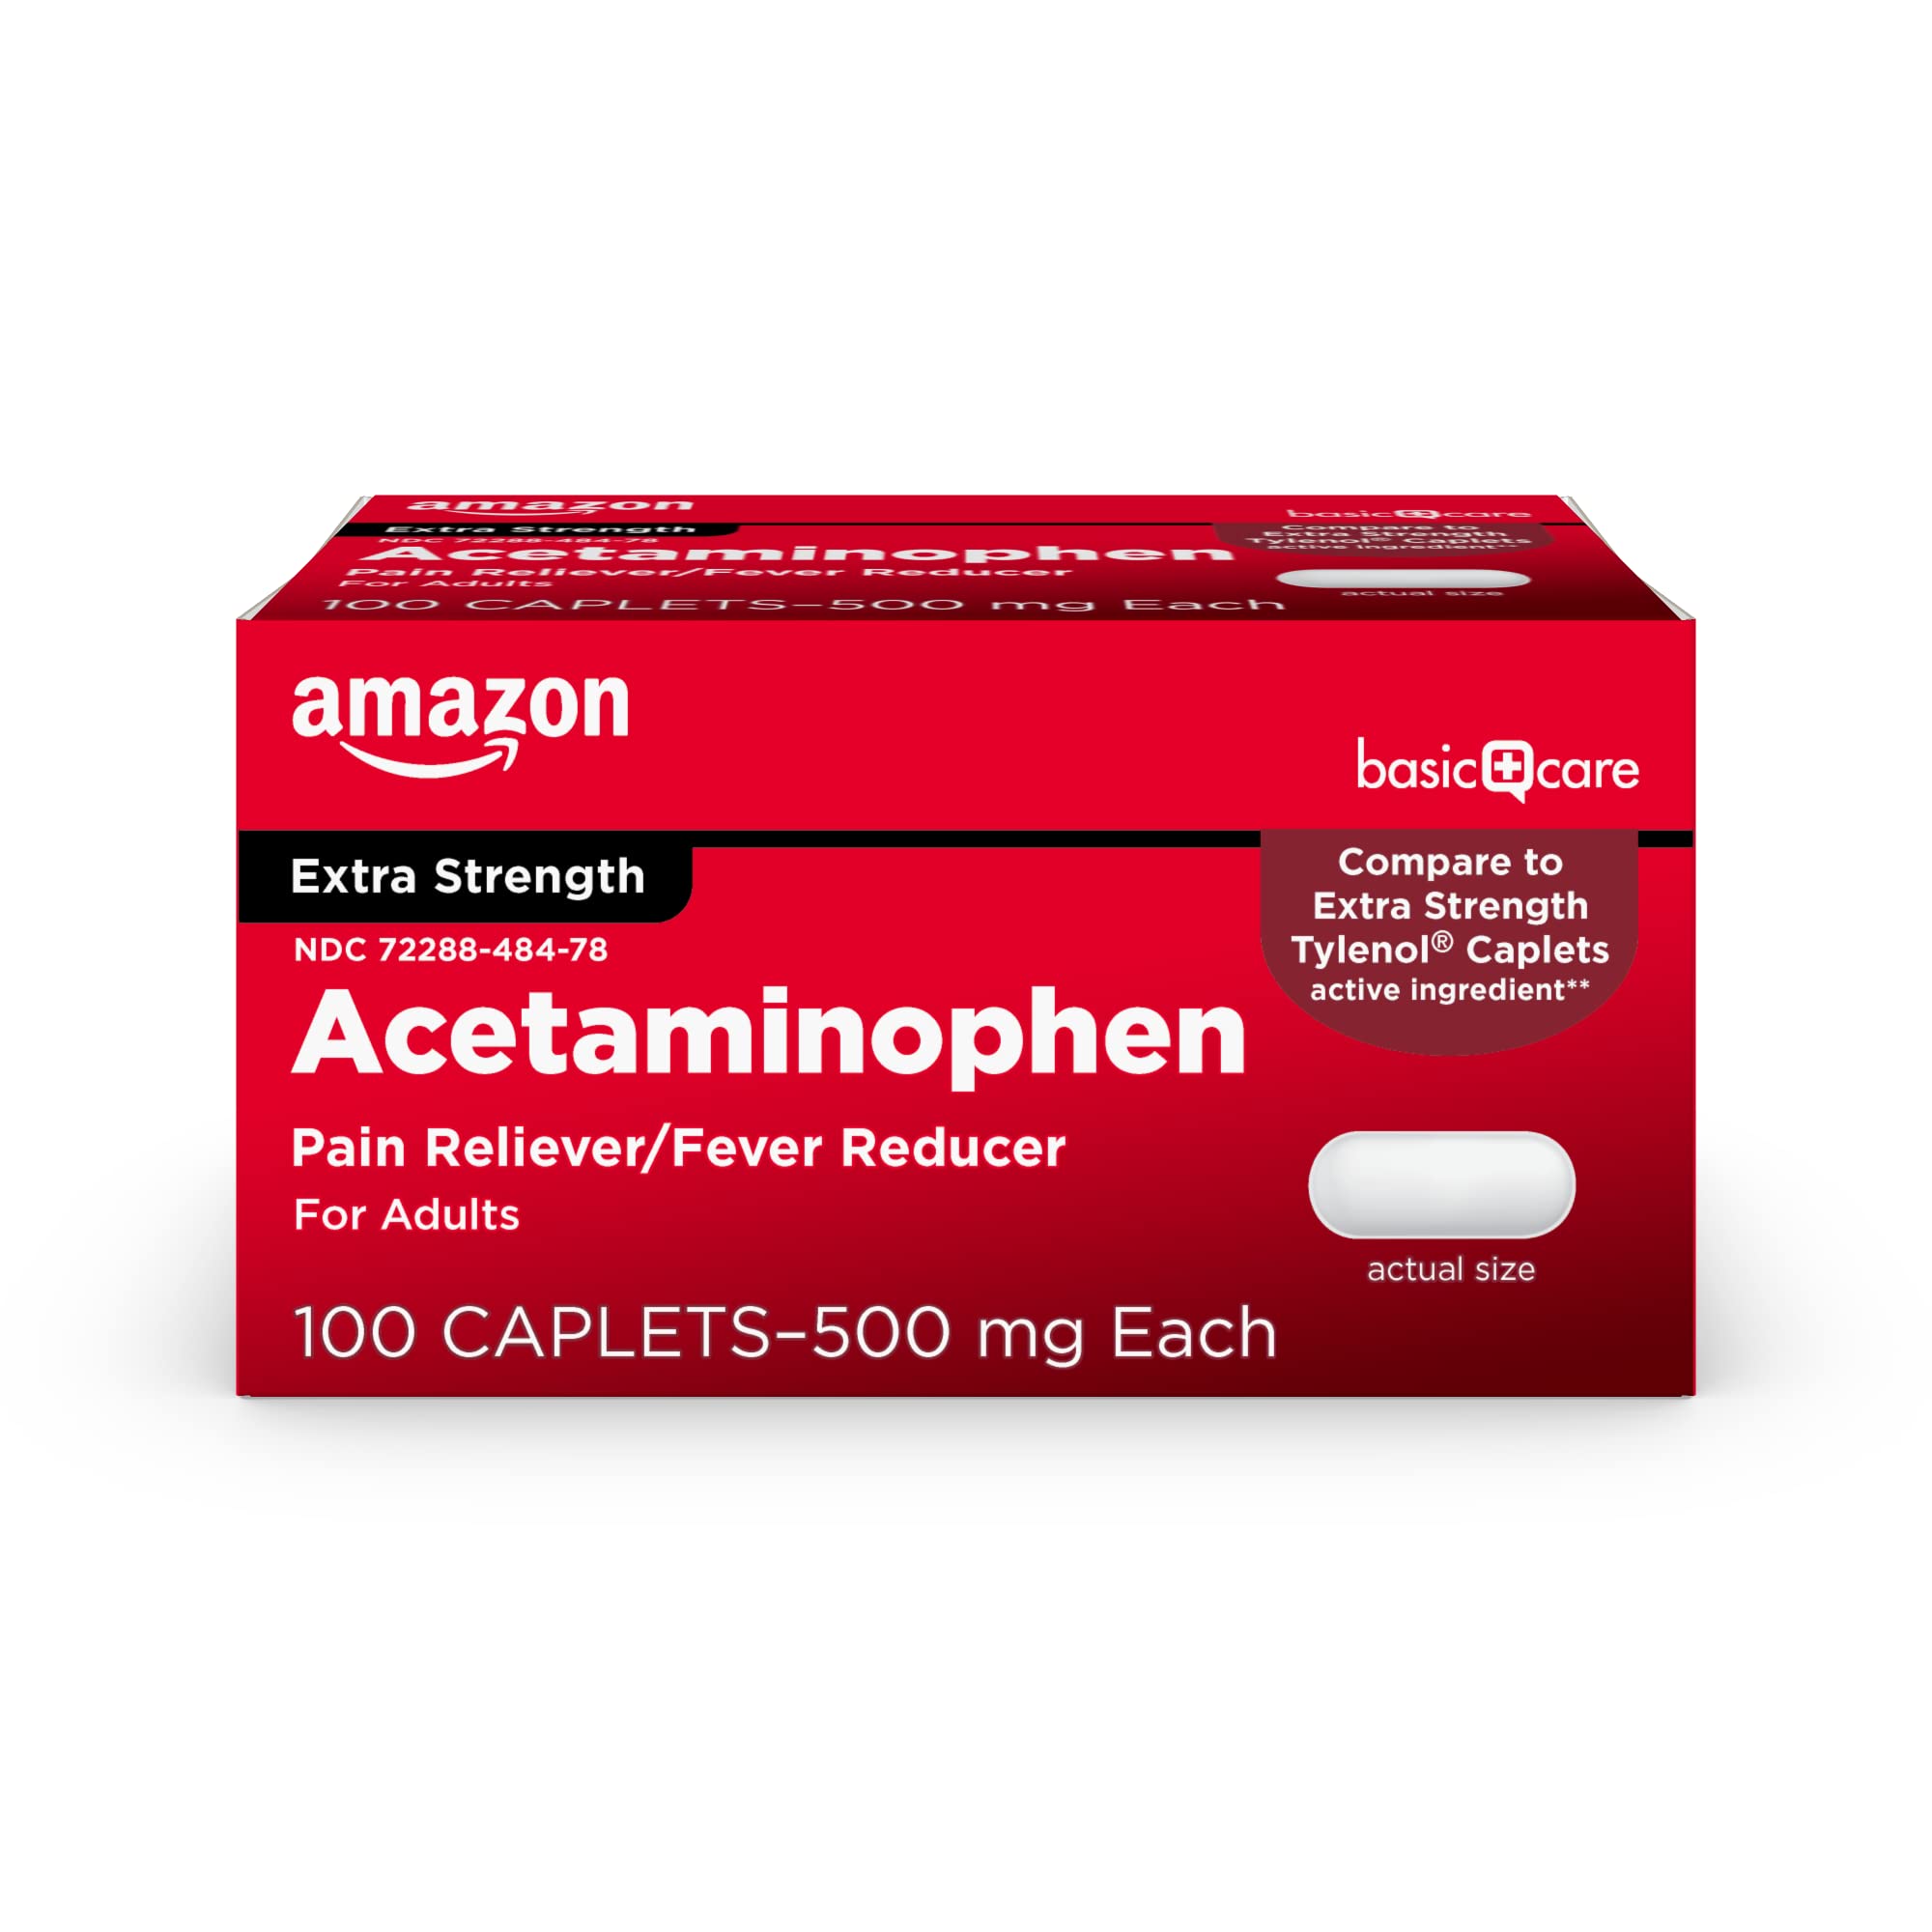 100-Count Amazon Basic Care Extra Strength 500mg Acetaminophen Caplets $3.04 w/ S&S + Free Shipping w/ Prime or on orders over $35